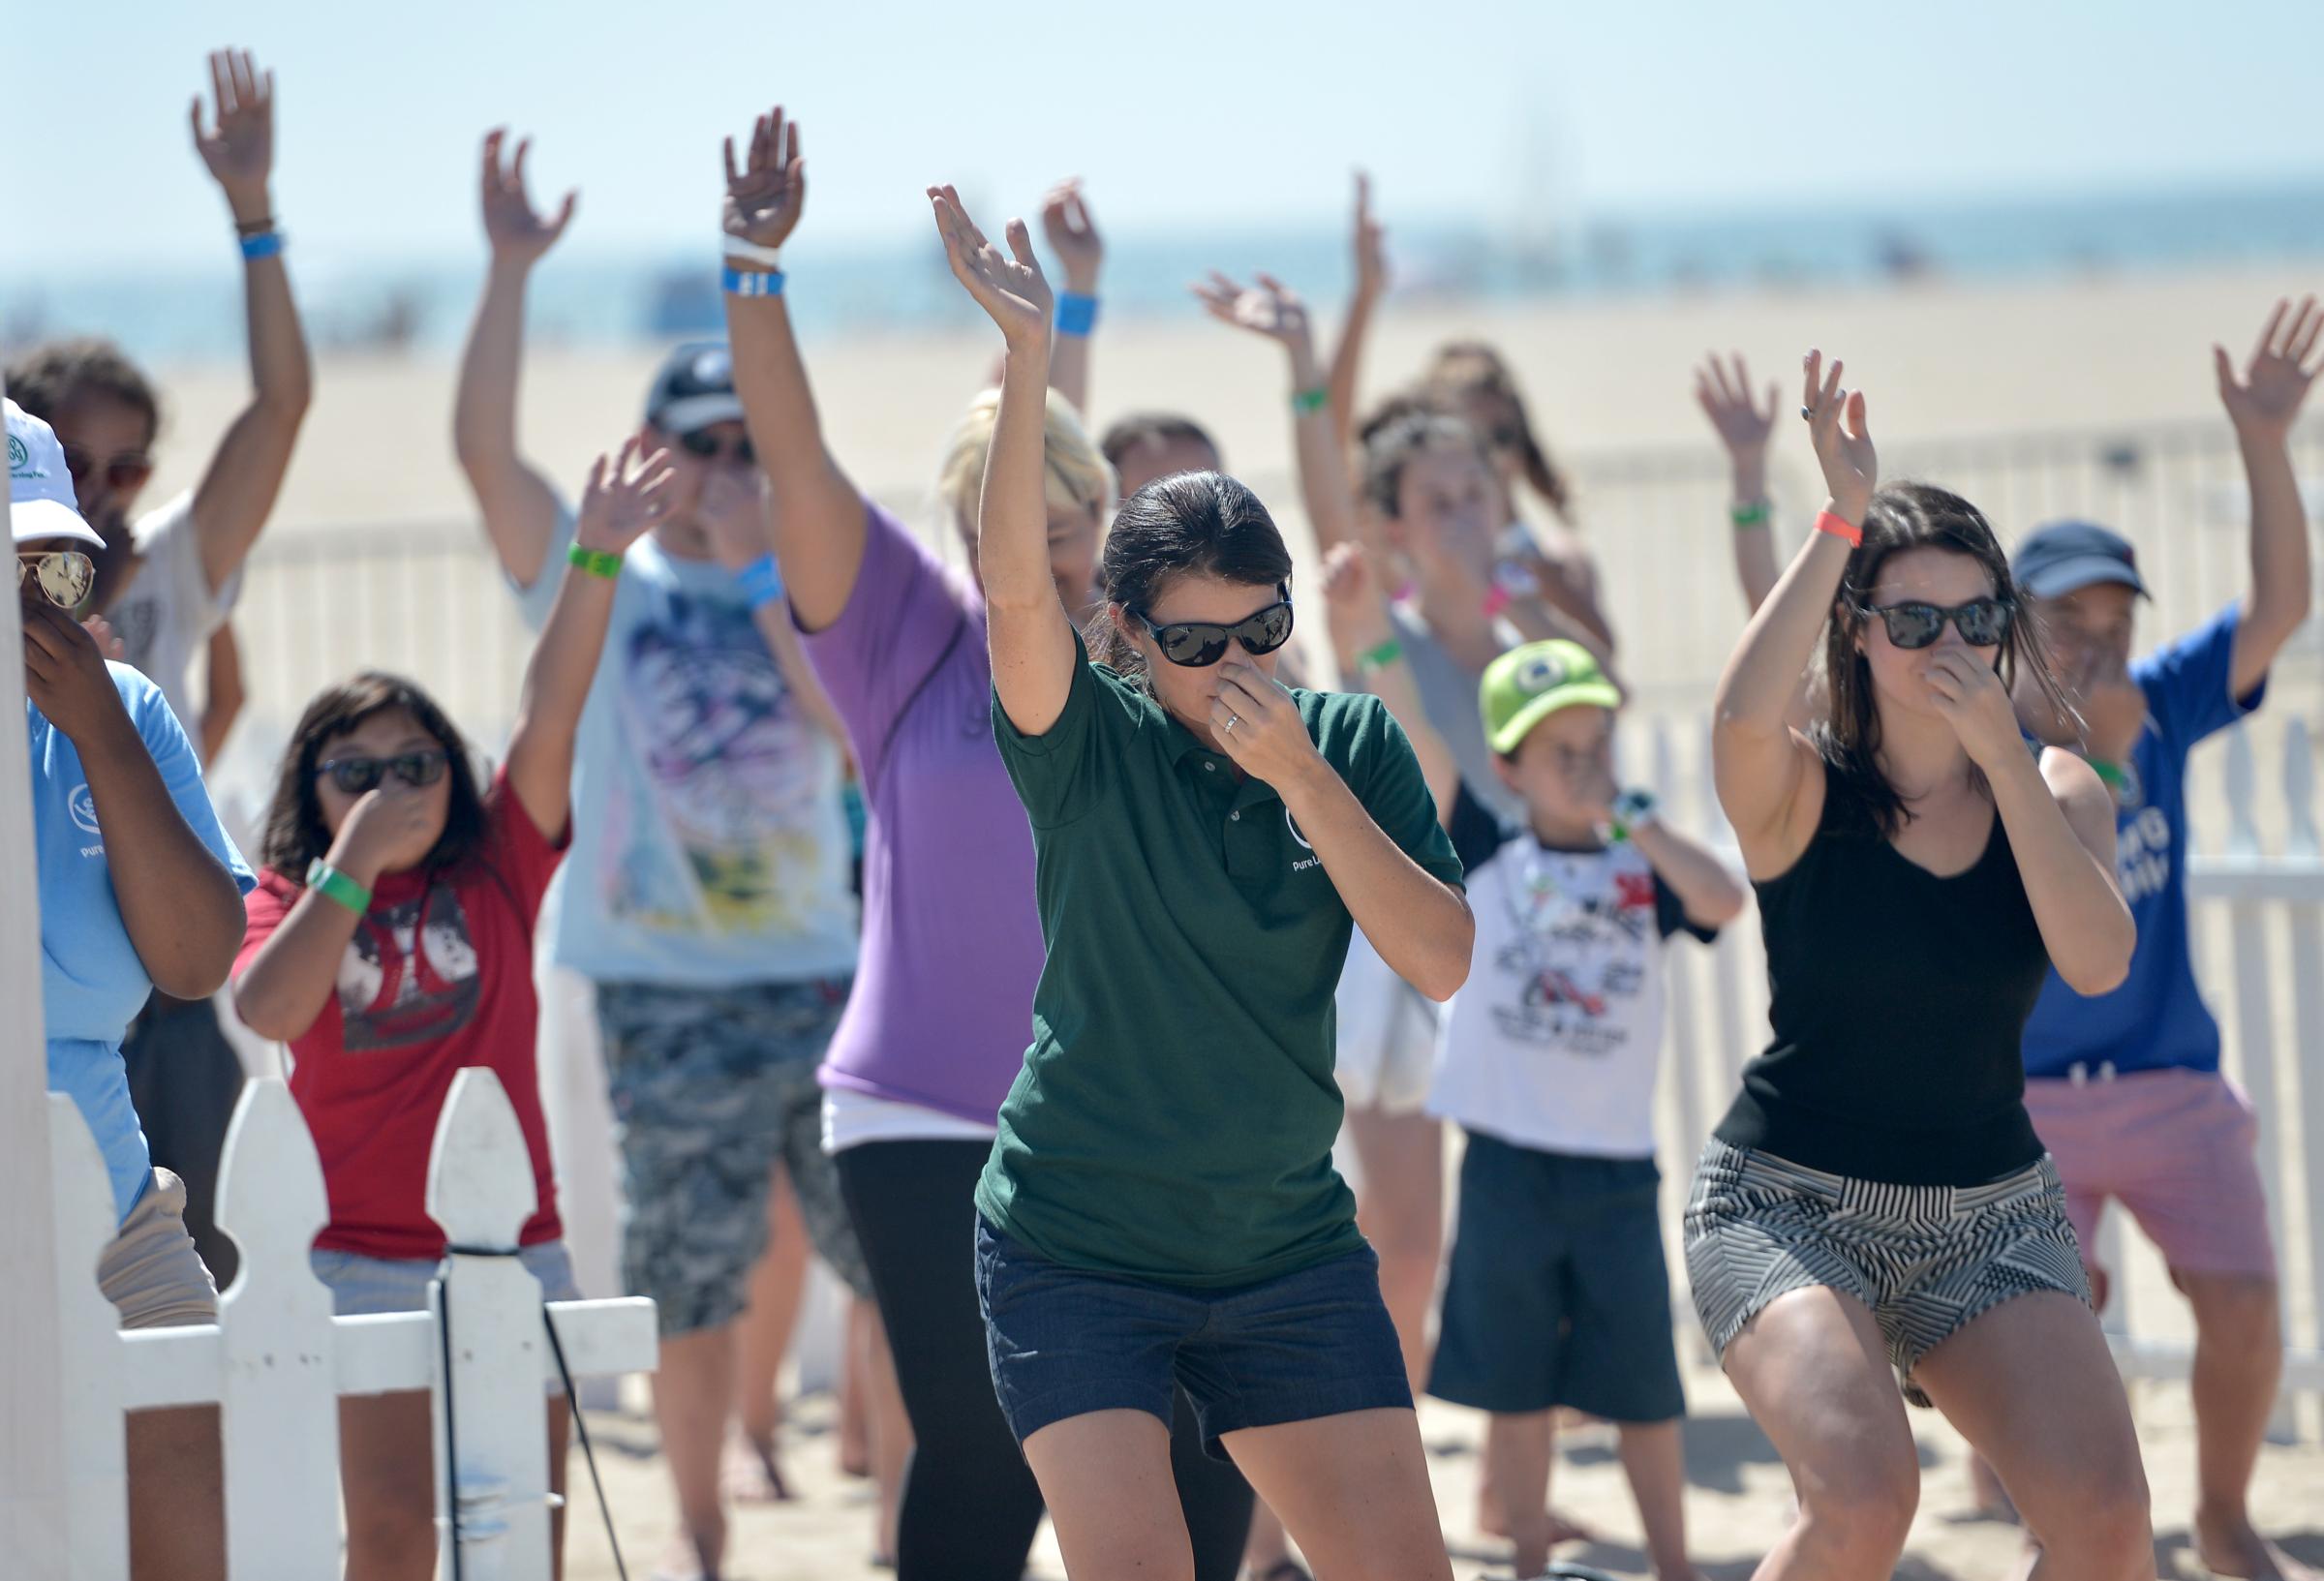 Mia Hamm And LeapFrog Attempt To Become GUINNESS WORLD RECORDS Record Holders In Celebration Of The launch Of The New LeapBand Activity Tracker For Kids At The First-Ever Fit Made Fun Day